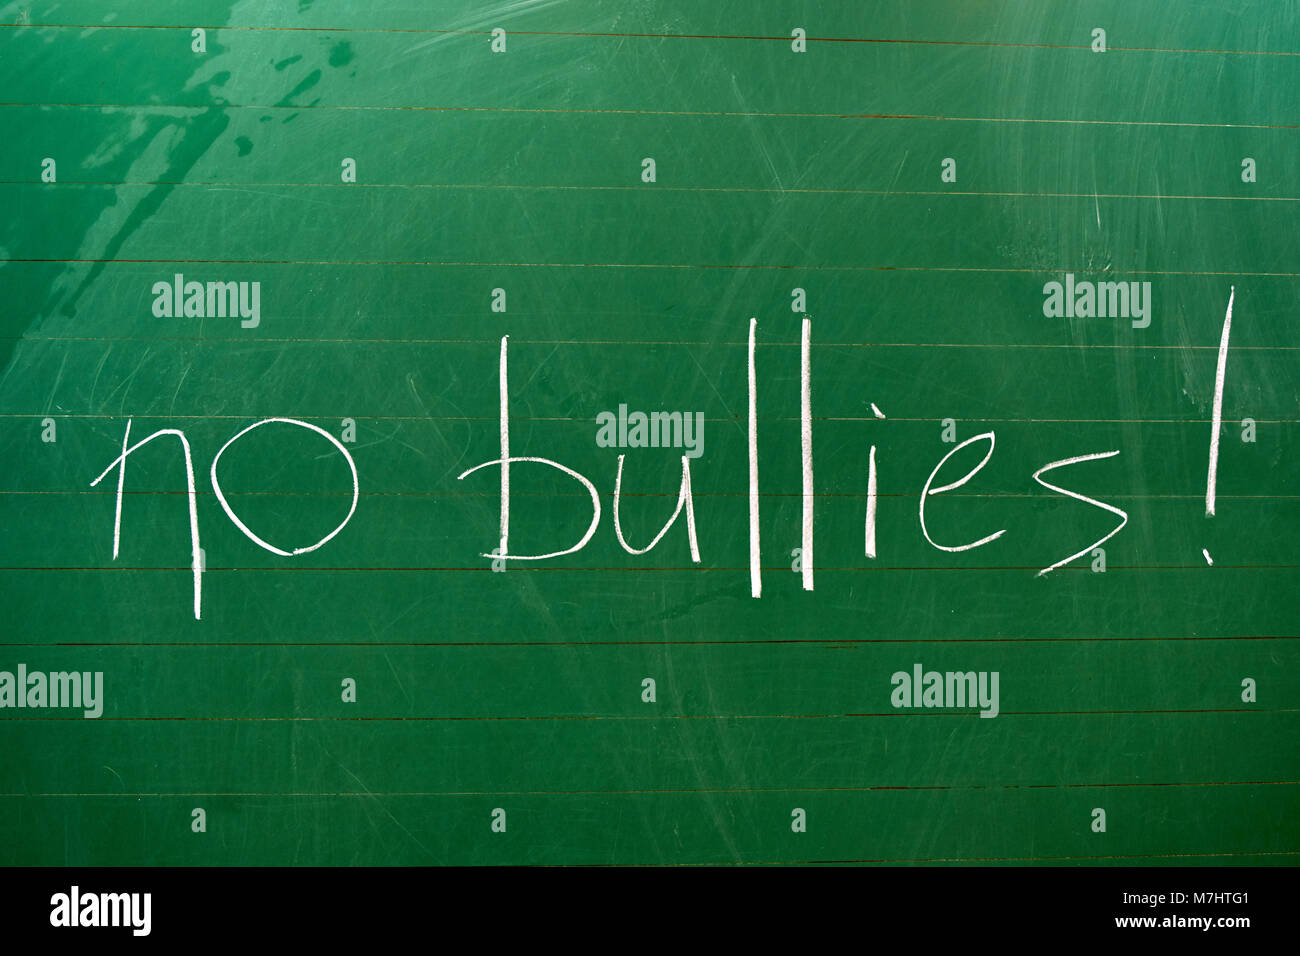 The words NO BULLIES written on the green school board with a white chalk background Stock Photo